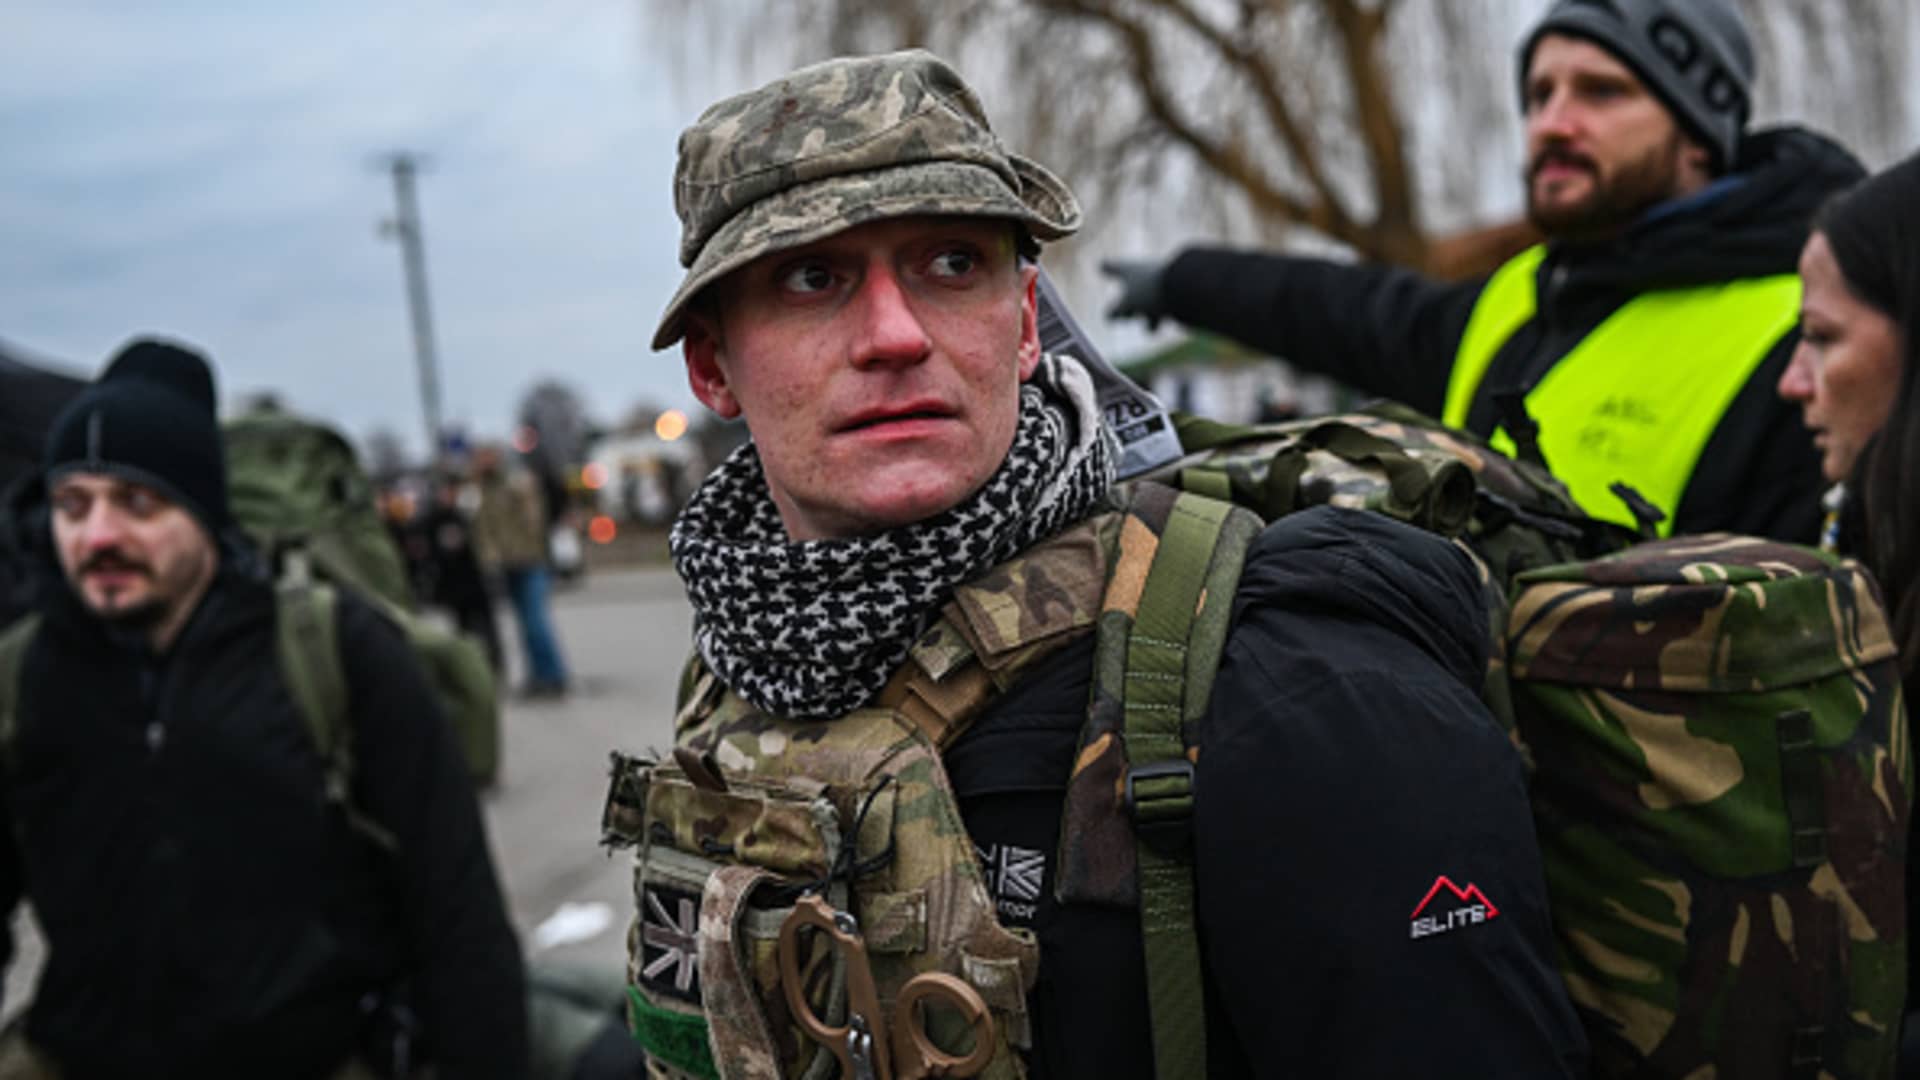 Mikeand Alex from the United Kingdom who served in Afghanistan as paramedics arrive at the Polish Ukrainian border crossing looking for transport to Lviv to join the fight against the Russian invasion on March 06, 2022 in Medyka, Poland.